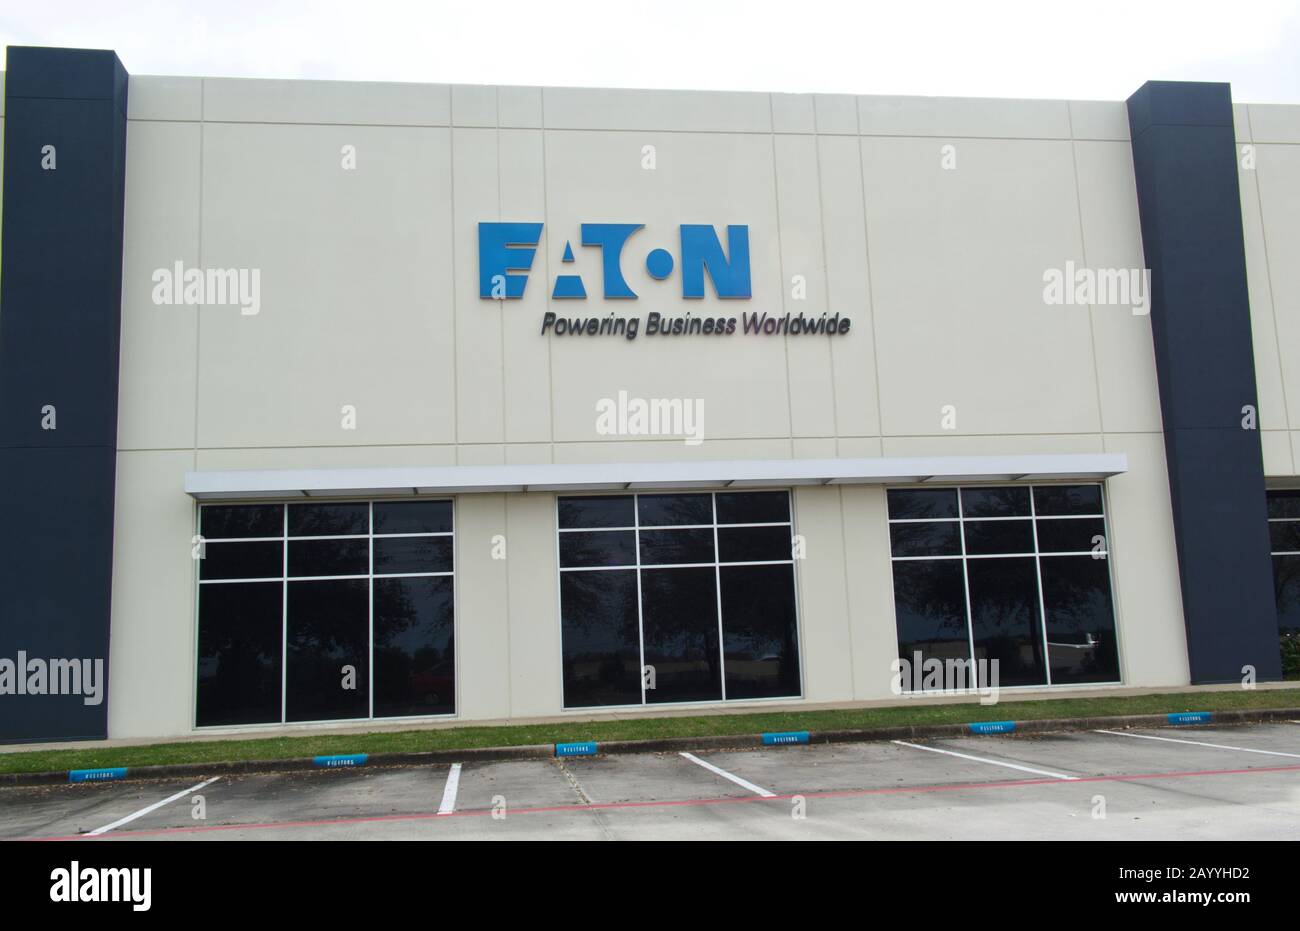 Eaton Corporation office building exterior in Houston, TX. A Power Management company founded in 1911 in the USA it is located in over 175 countries. Stock Photo